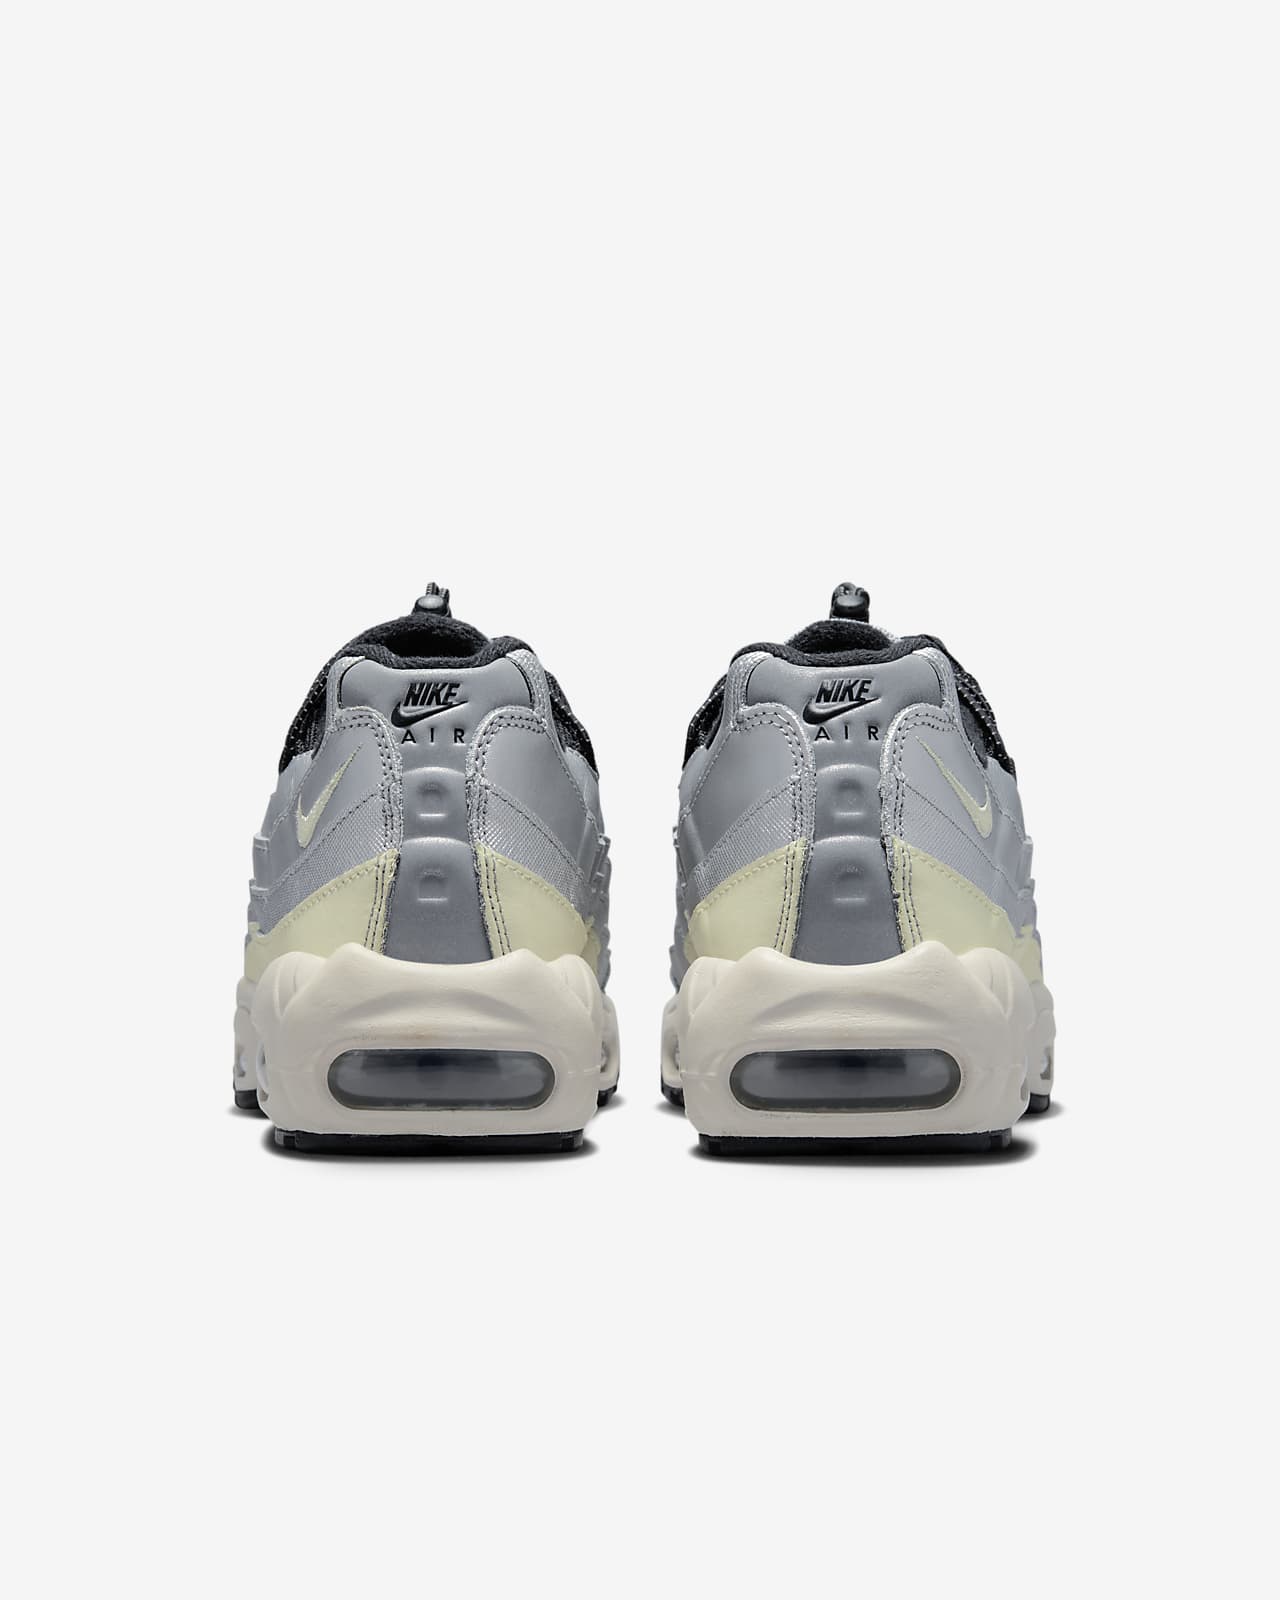 size 7 nike air max 95 shoes